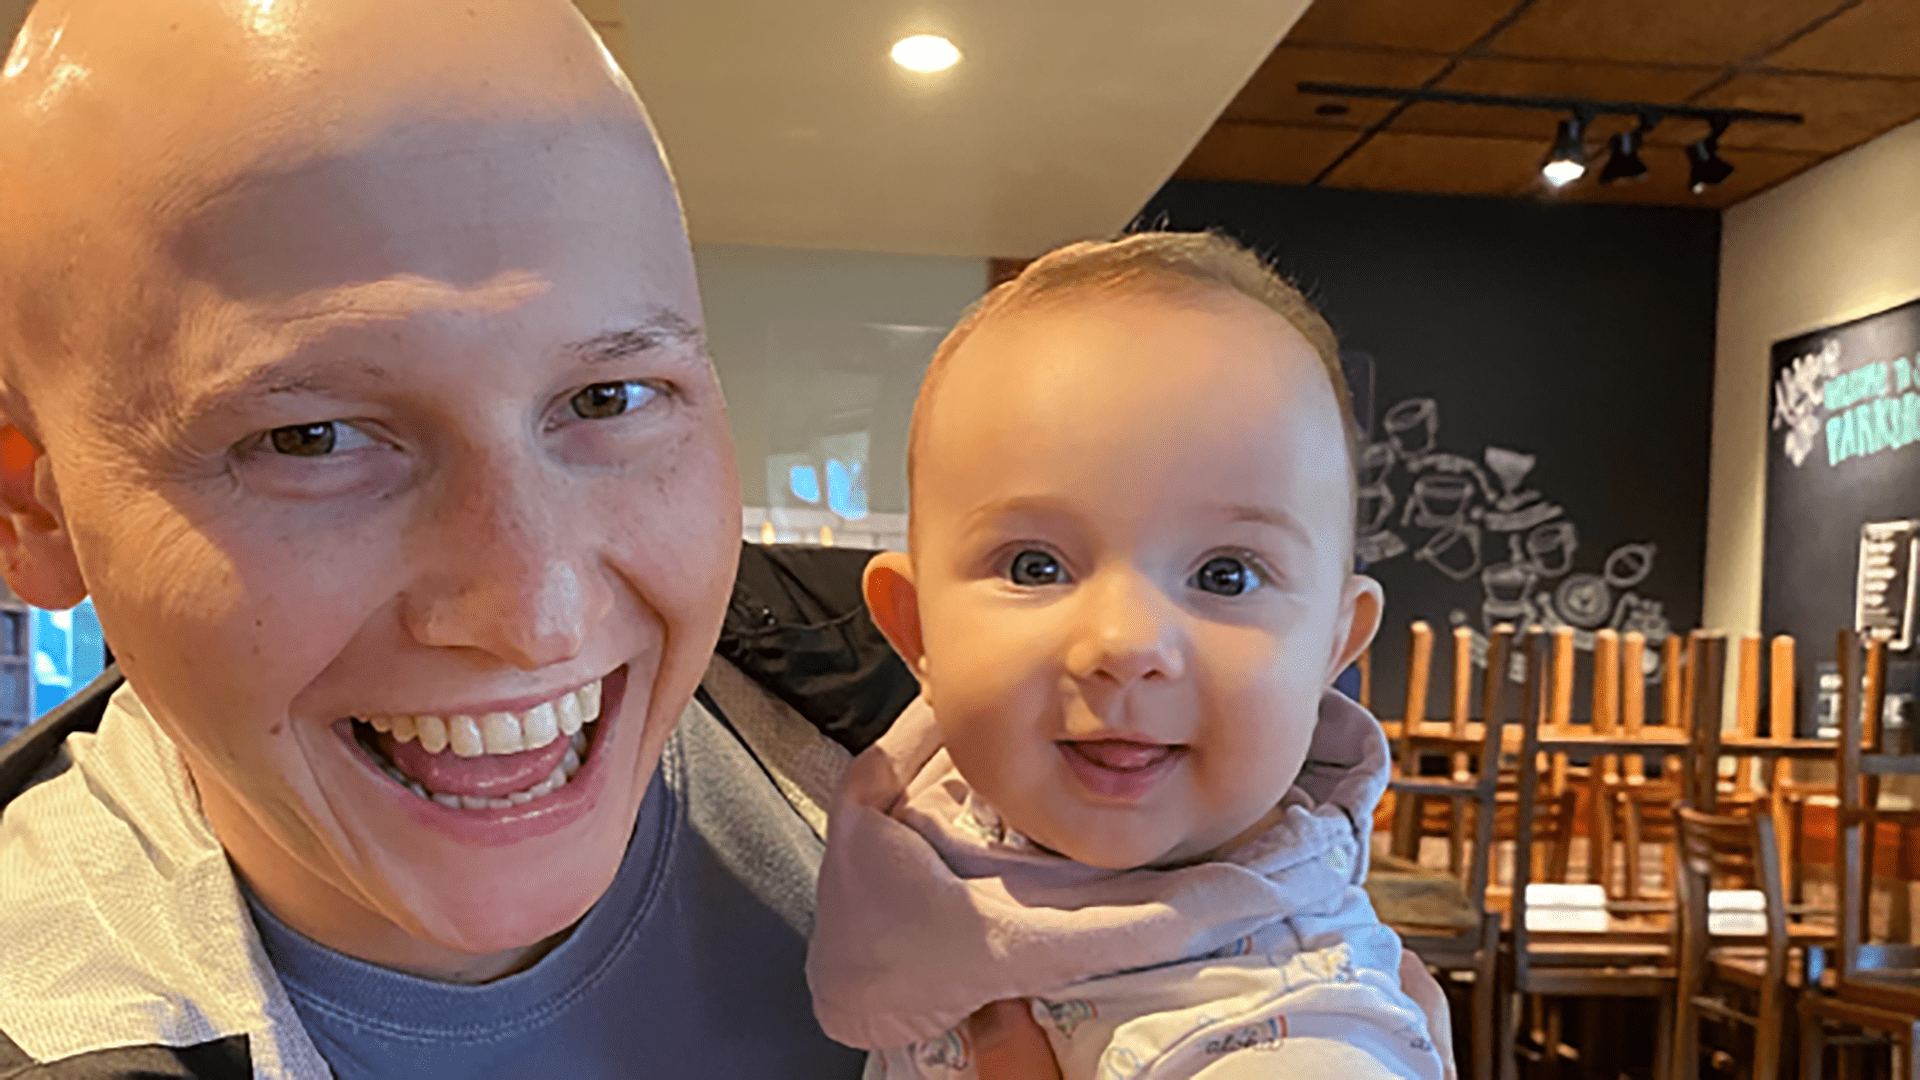 A young man cancer patient holding a baby